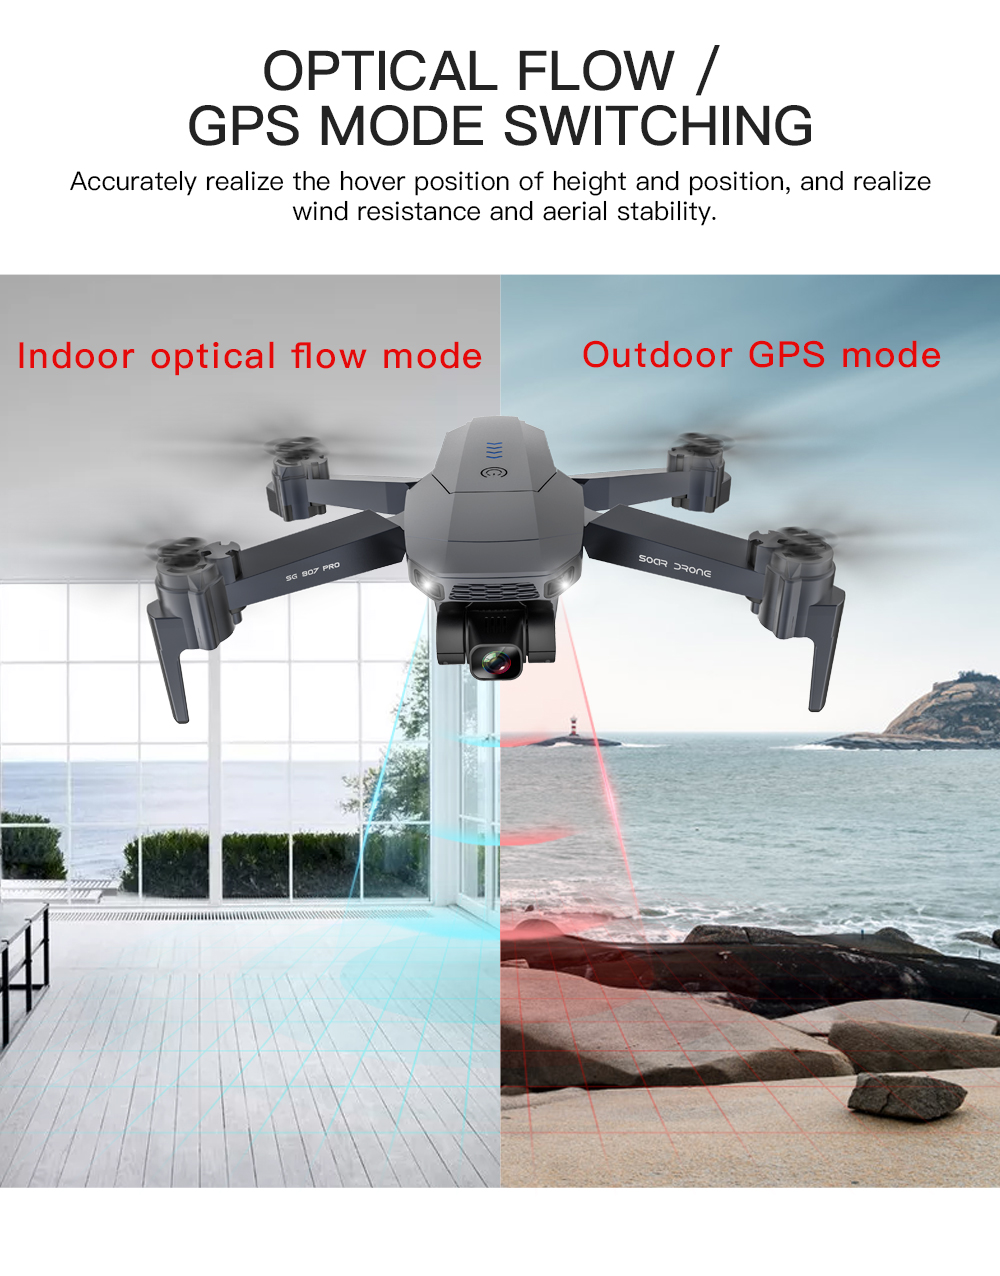 ZLL SG907 Pro 5G WIFI FPV GPS With 4K HD Dual Camera Two-axis Gimbal Optical Flow Positioning Foldable RC Drone Quadcopter RTF 14